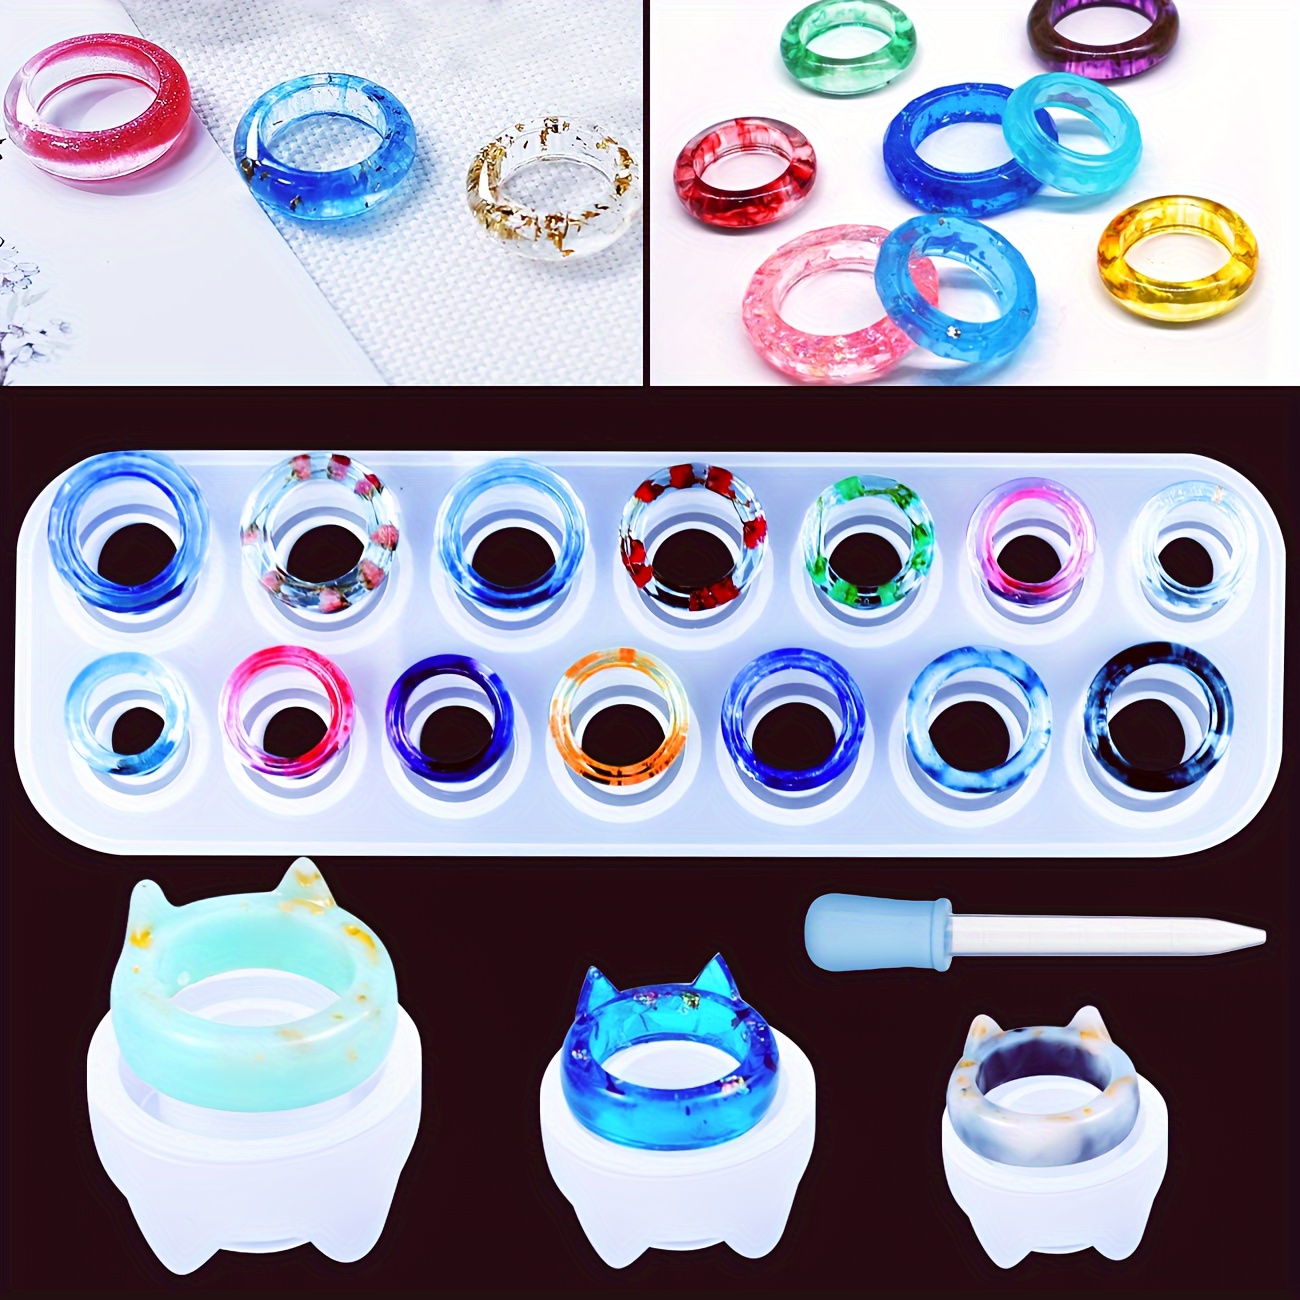 Resin Ring Mold with 14 Kinds of Gem Resin Molds 2pcs Resin